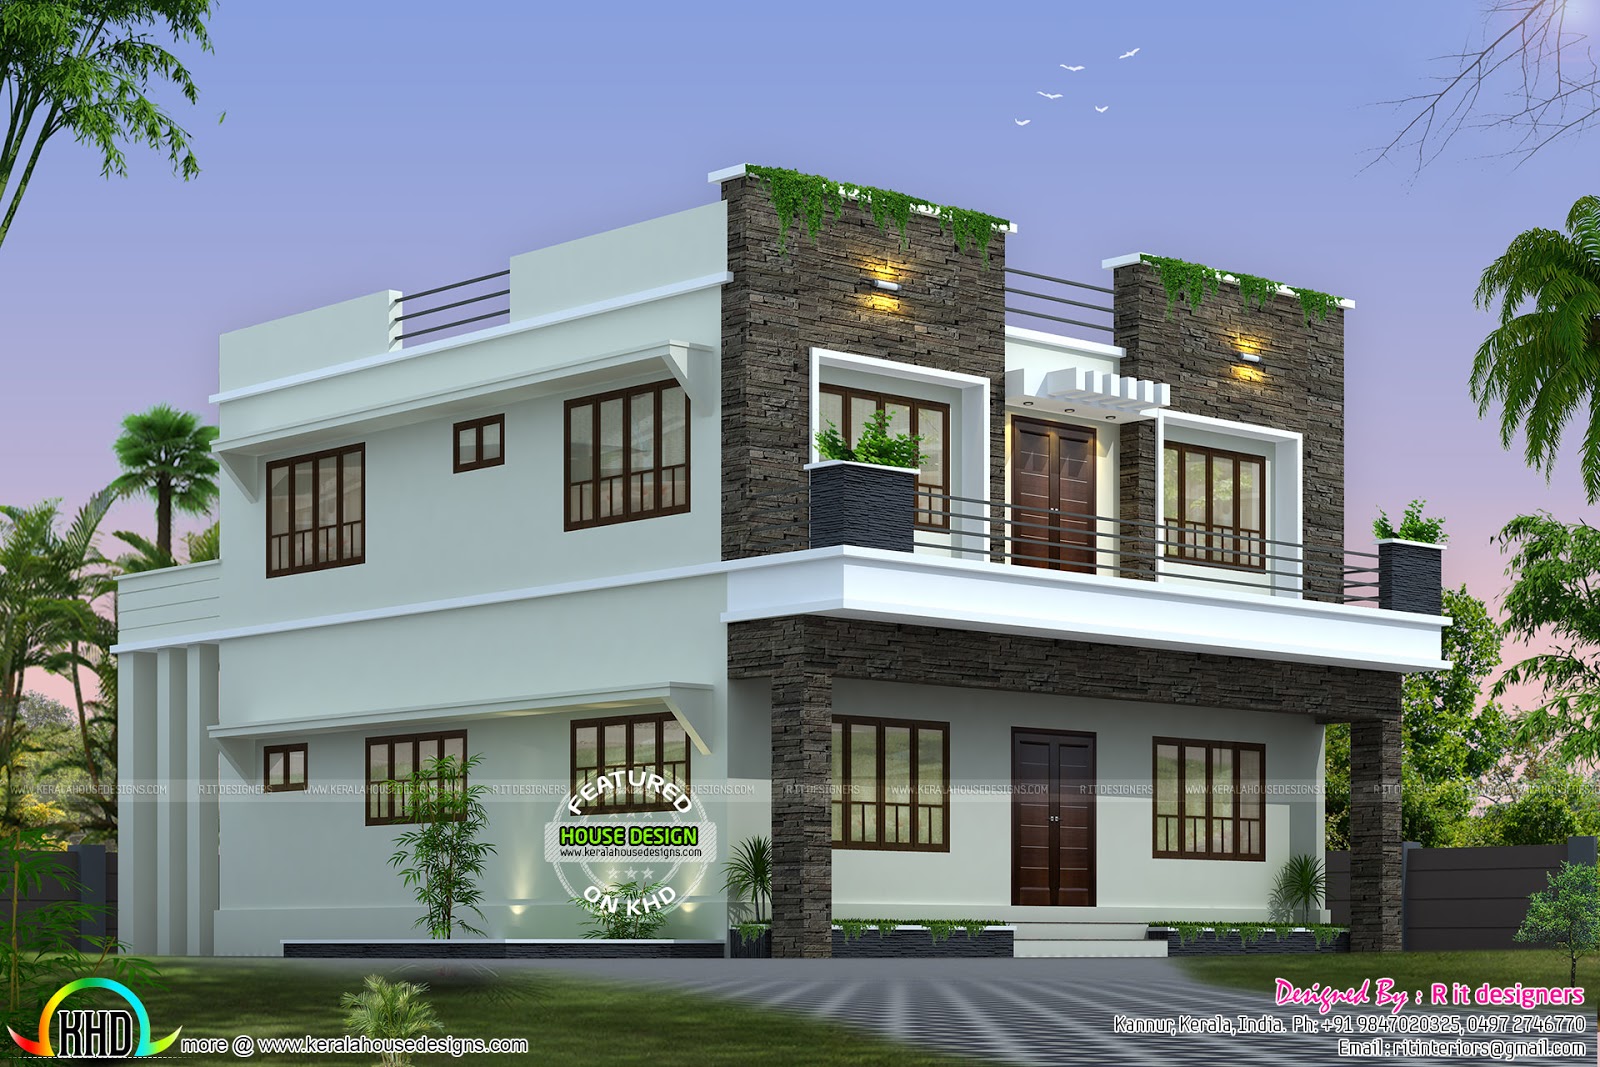  Front  side and back view  of box model home  Kerala home  